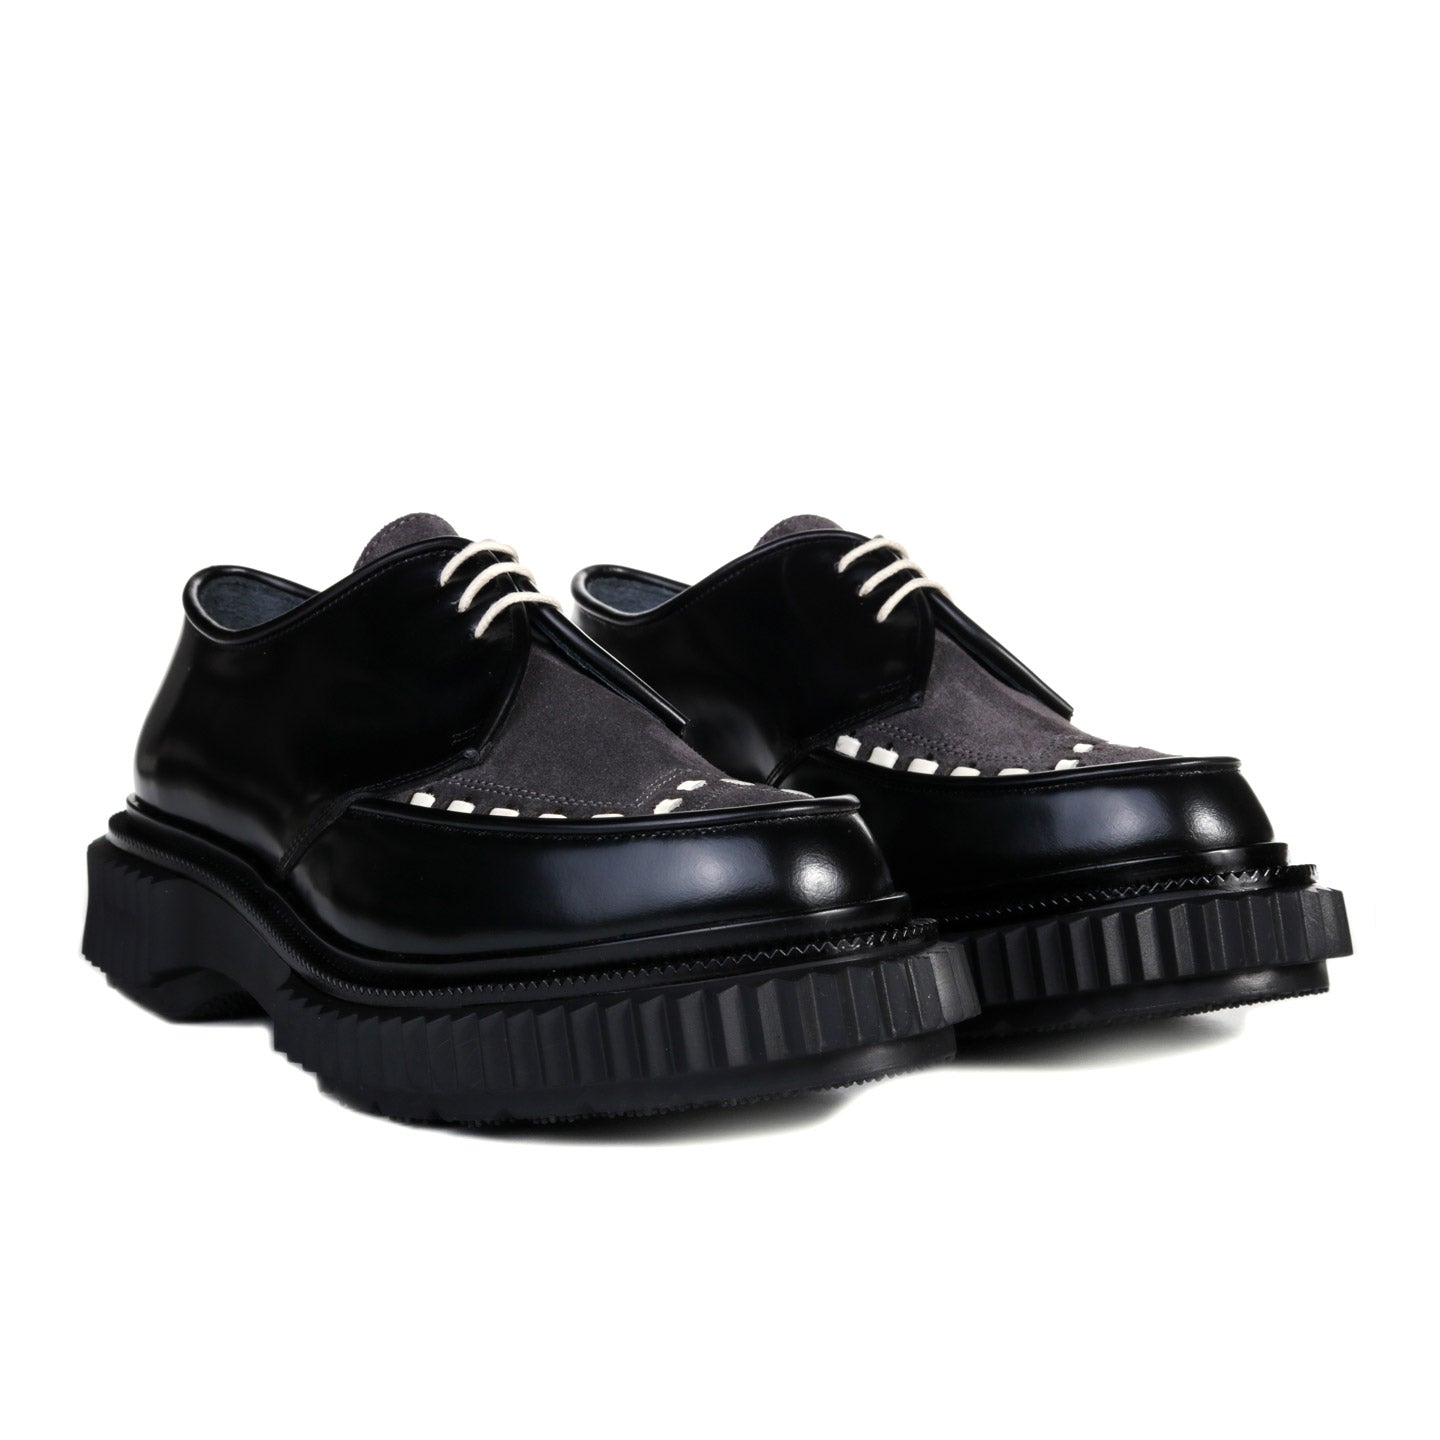 ADIEU UNDERCOVER TYPE 195 SHOE BLACK / CHARCOAL / IVORY